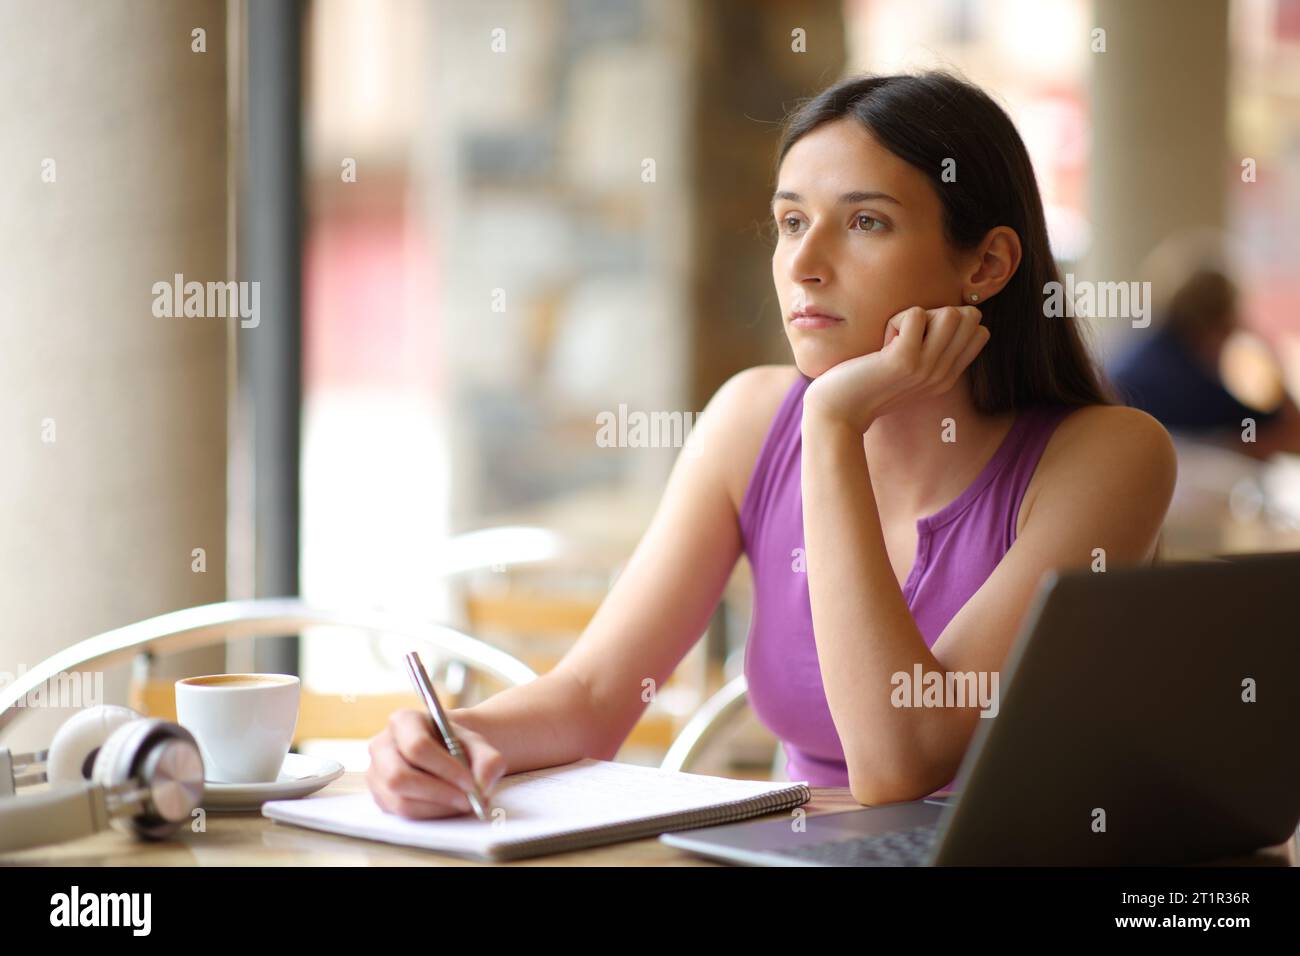 Demotivated student looking away sitting in a restaurant terrace Stock Photo